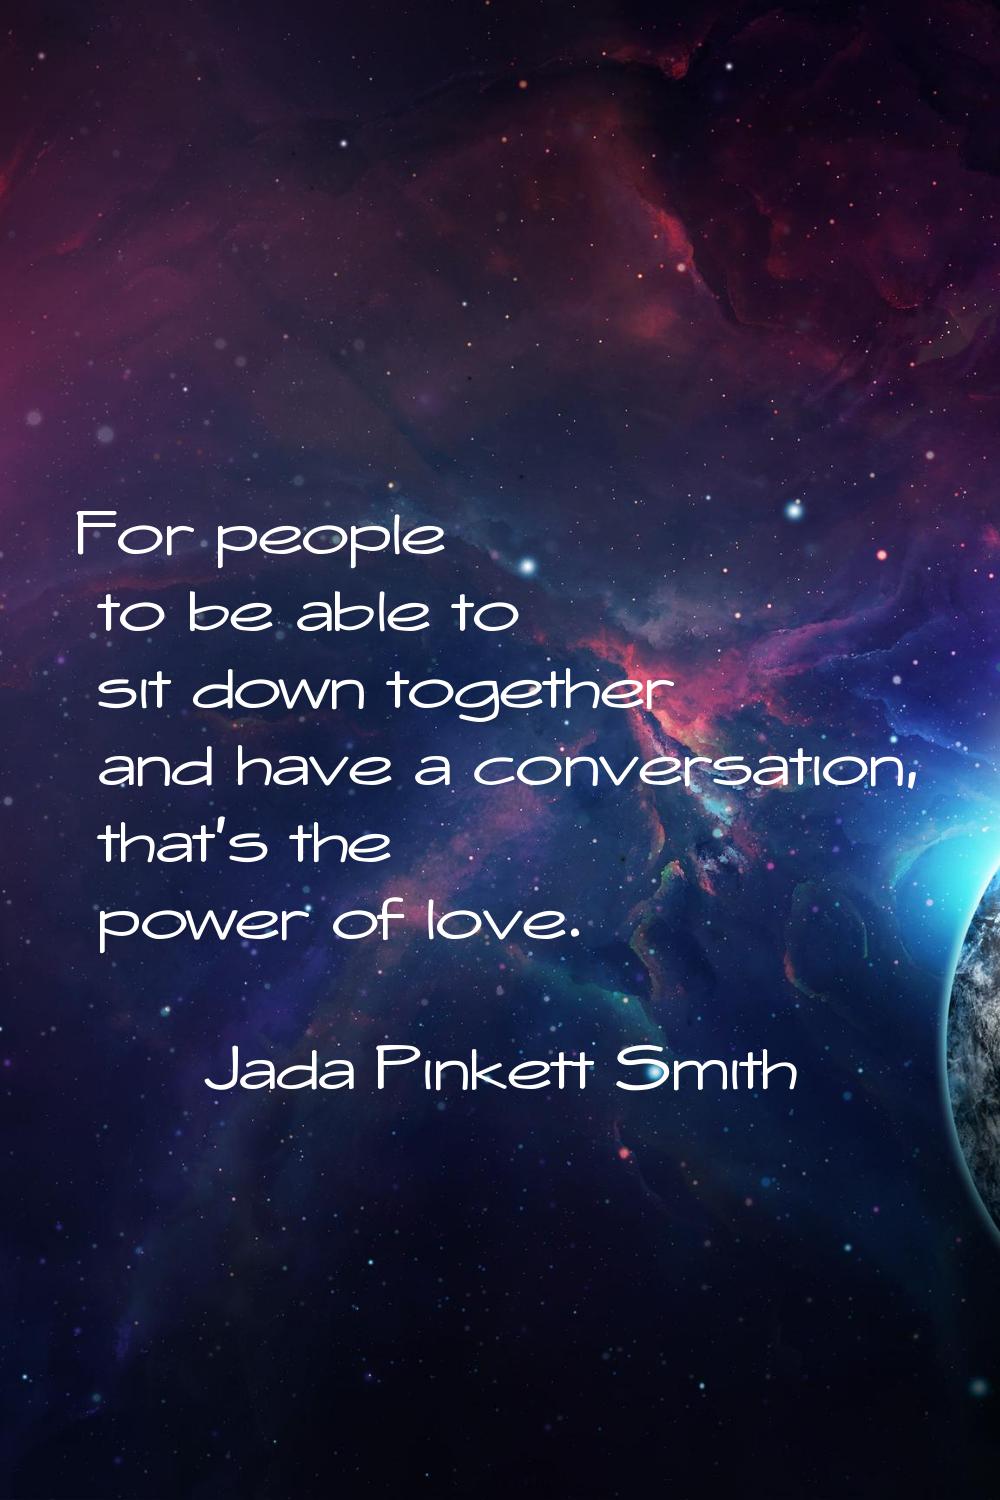 For people to be able to sit down together and have a conversation, that's the power of love.